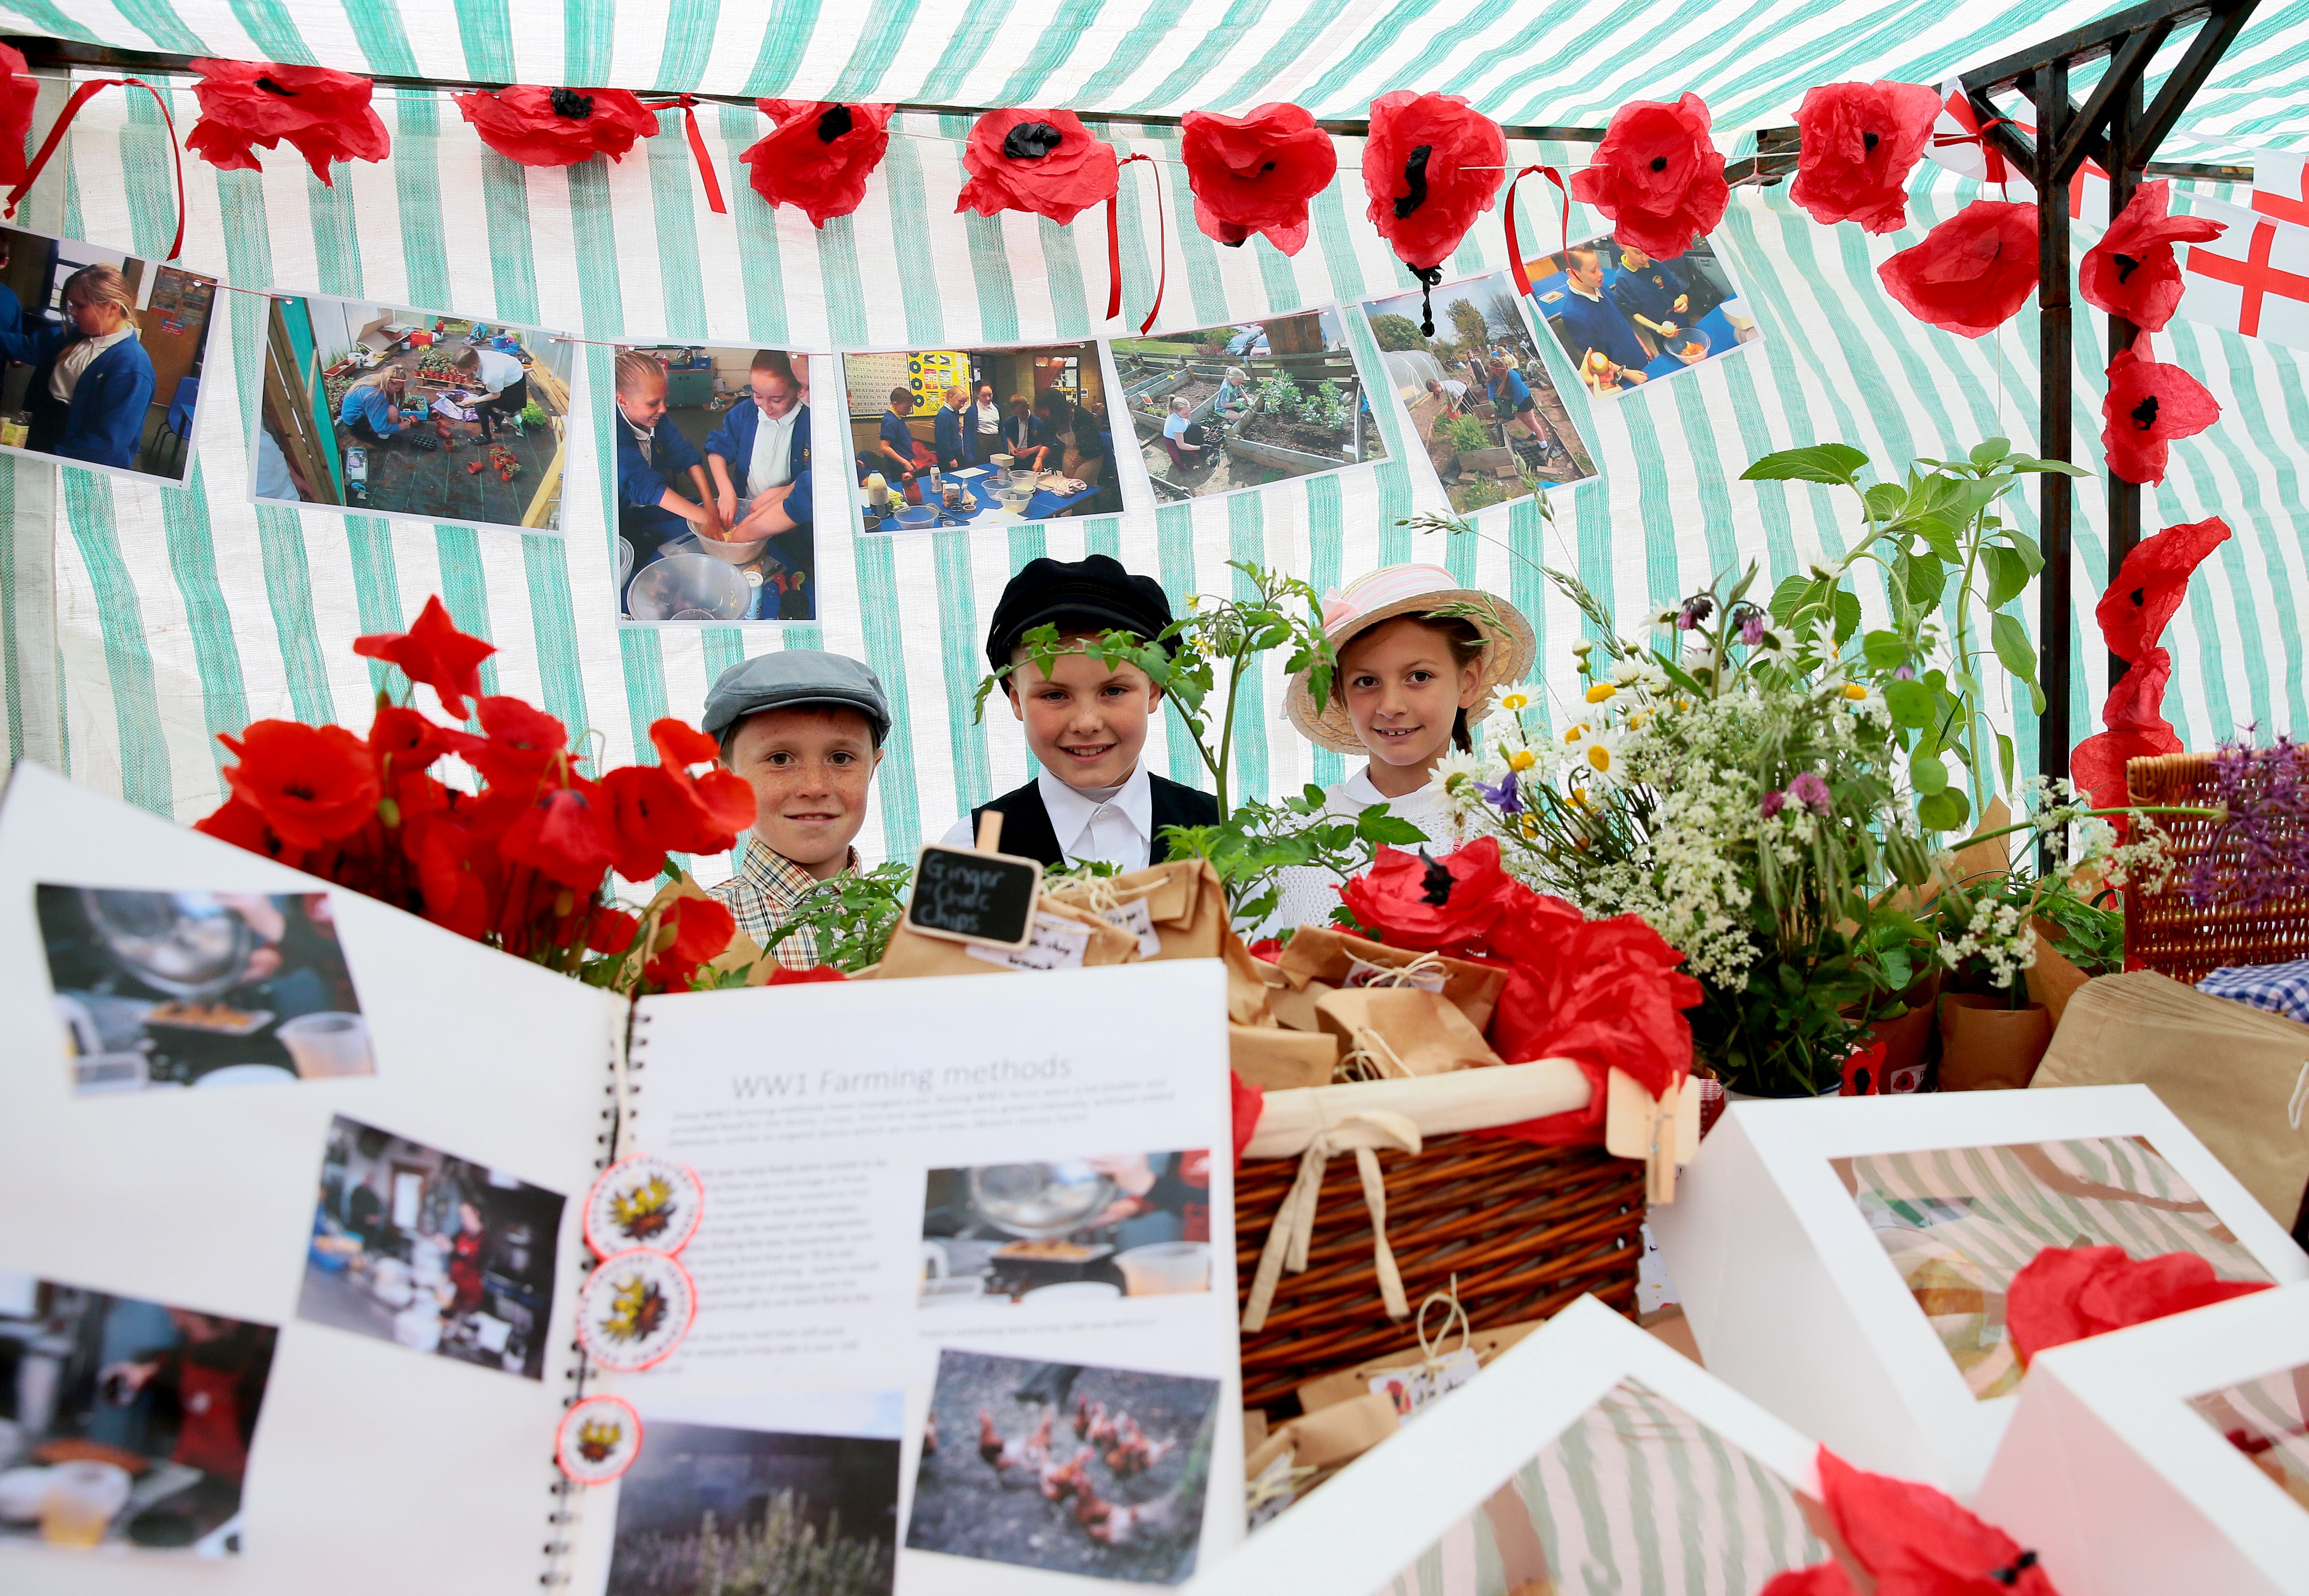 Children learn about life for their counterparts 100 years ago as war raged in Western Europe